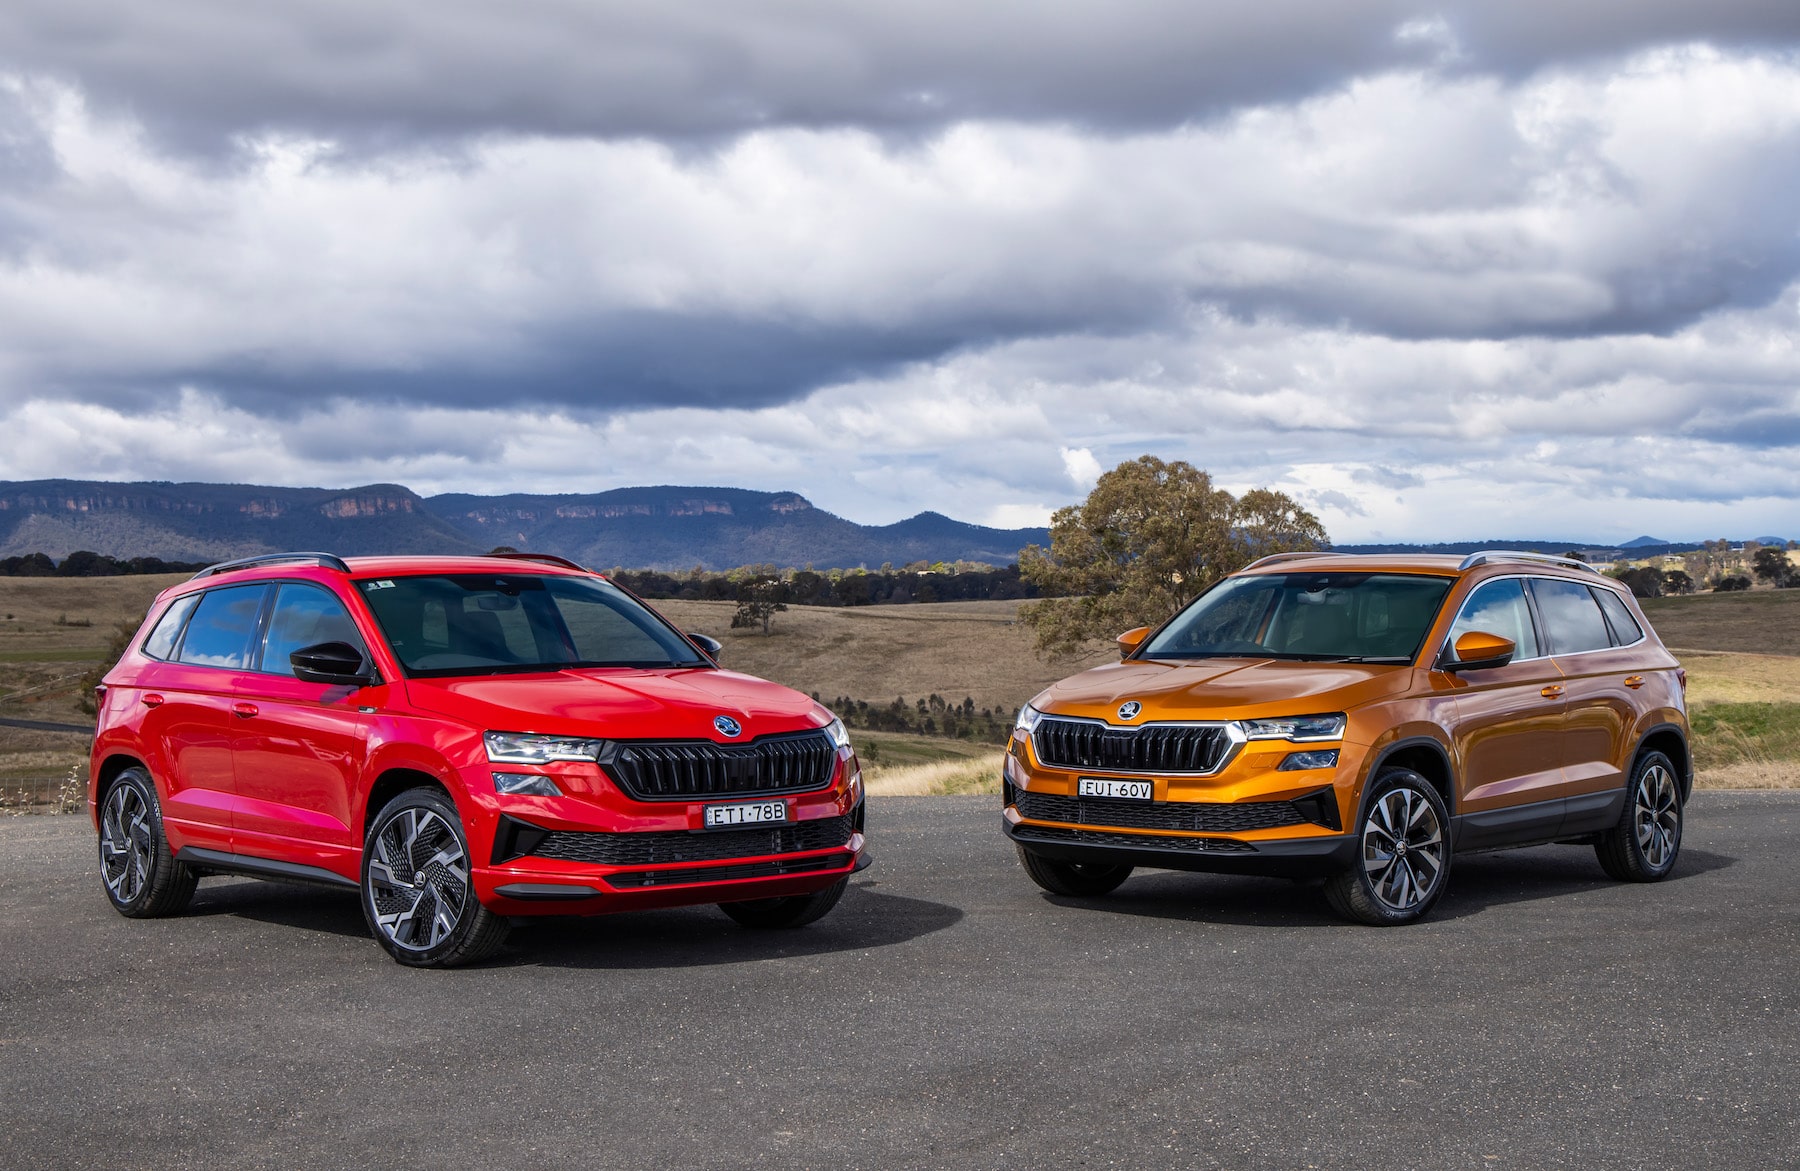 Skoda Updates Majority of Range with Added Safety Kit, Tech & Price Rises to Match